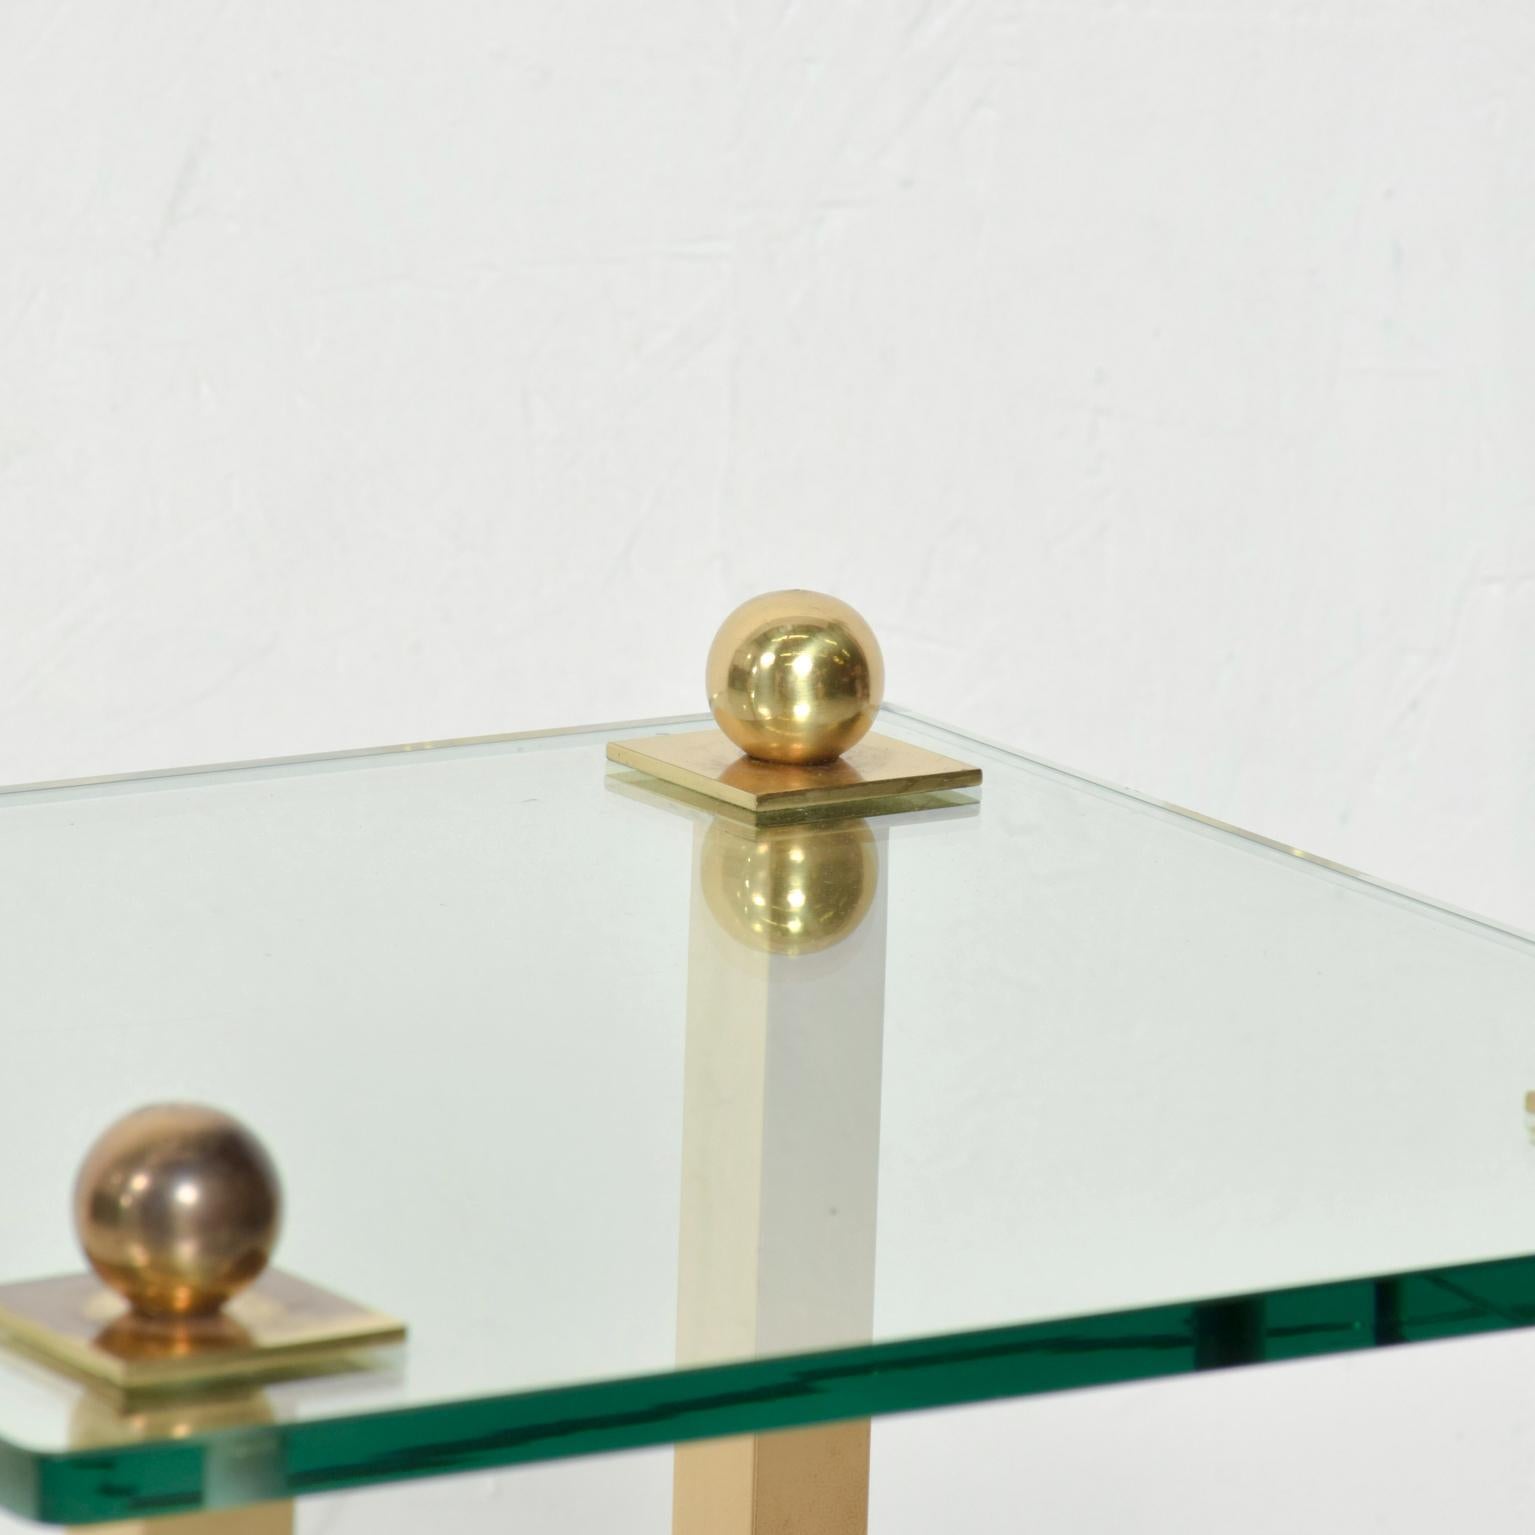 1970s Modern Regency Pair of Brass Side Tables Square Glass In Good Condition For Sale In Chula Vista, CA